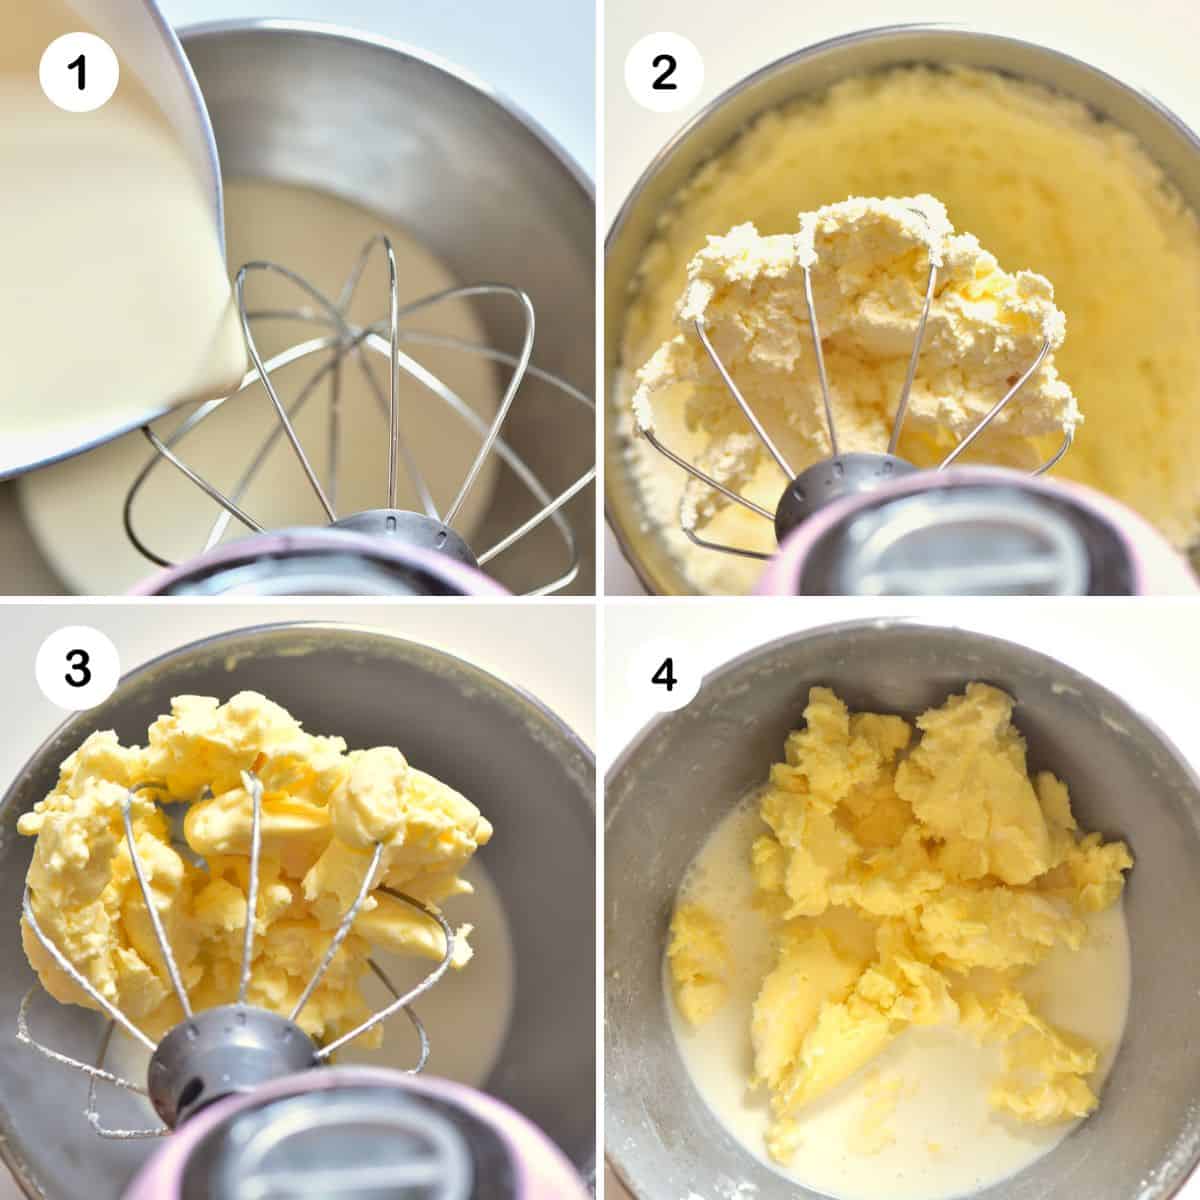 Steps for making butter in a stand mixer